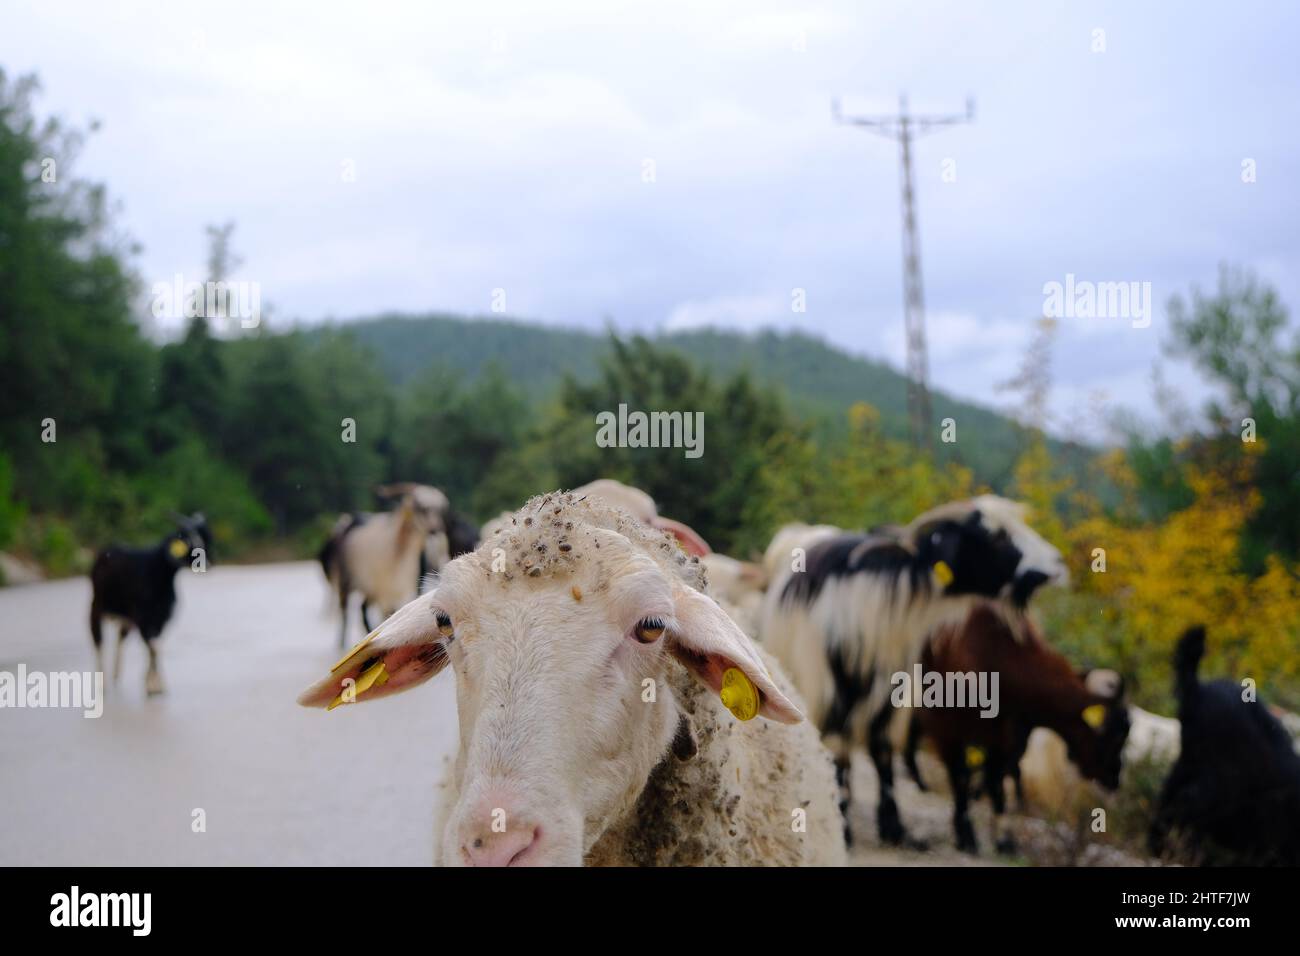 groups of animal, many and colorful sheeps, goats, and rams during rainy day in Bursa. Stock Photo